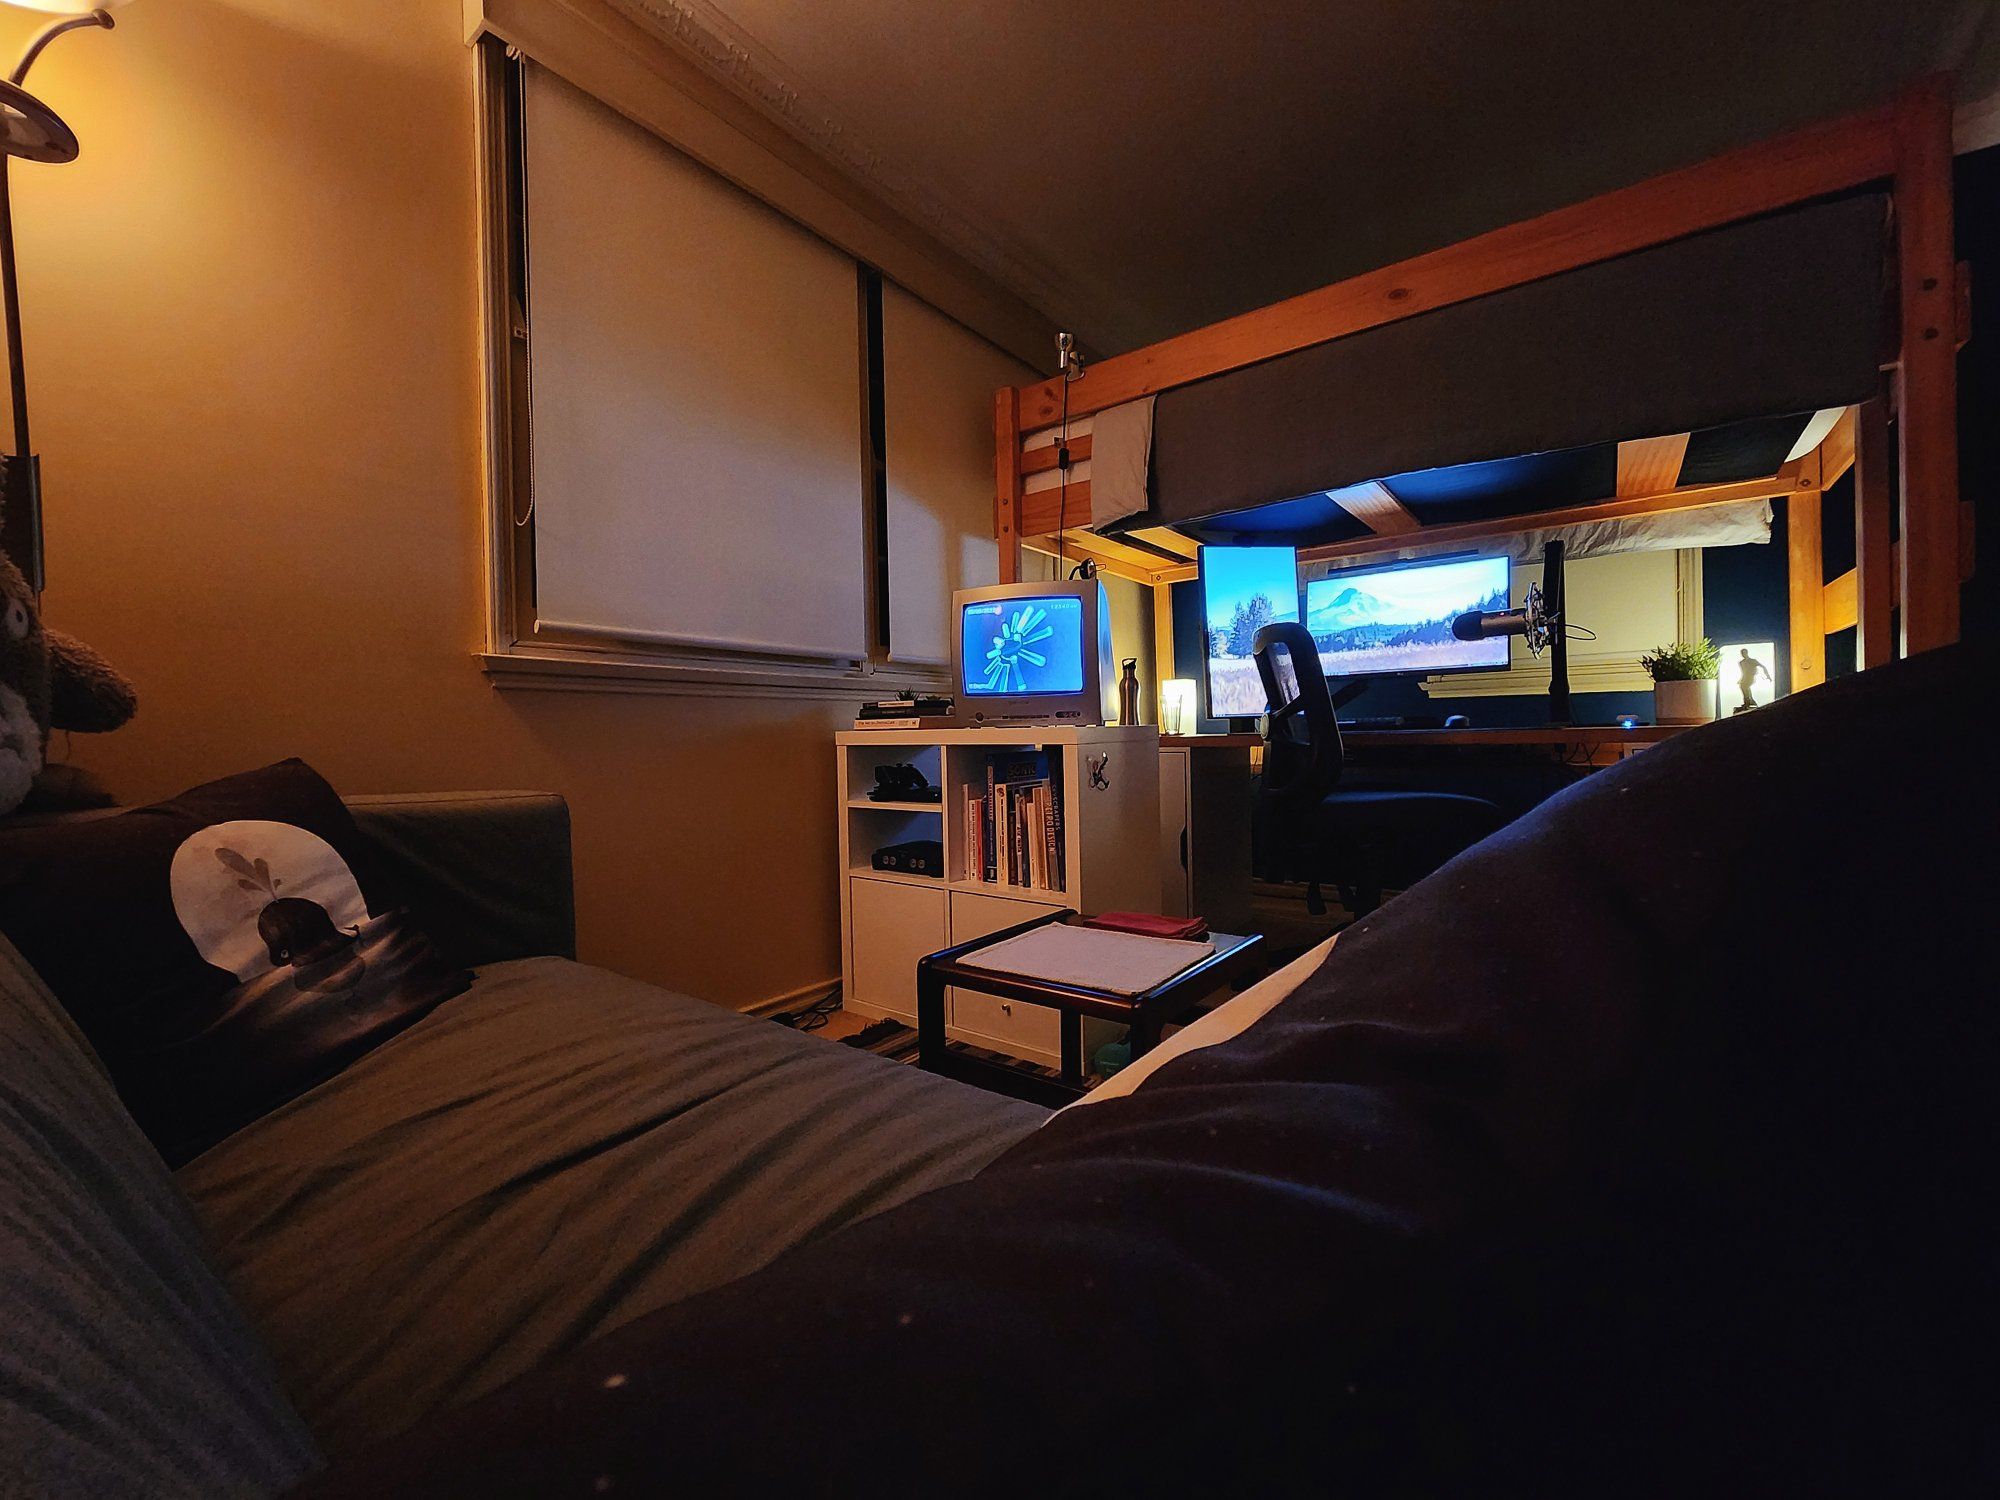 A small bedroom with a gaming desk setup under the loft bed